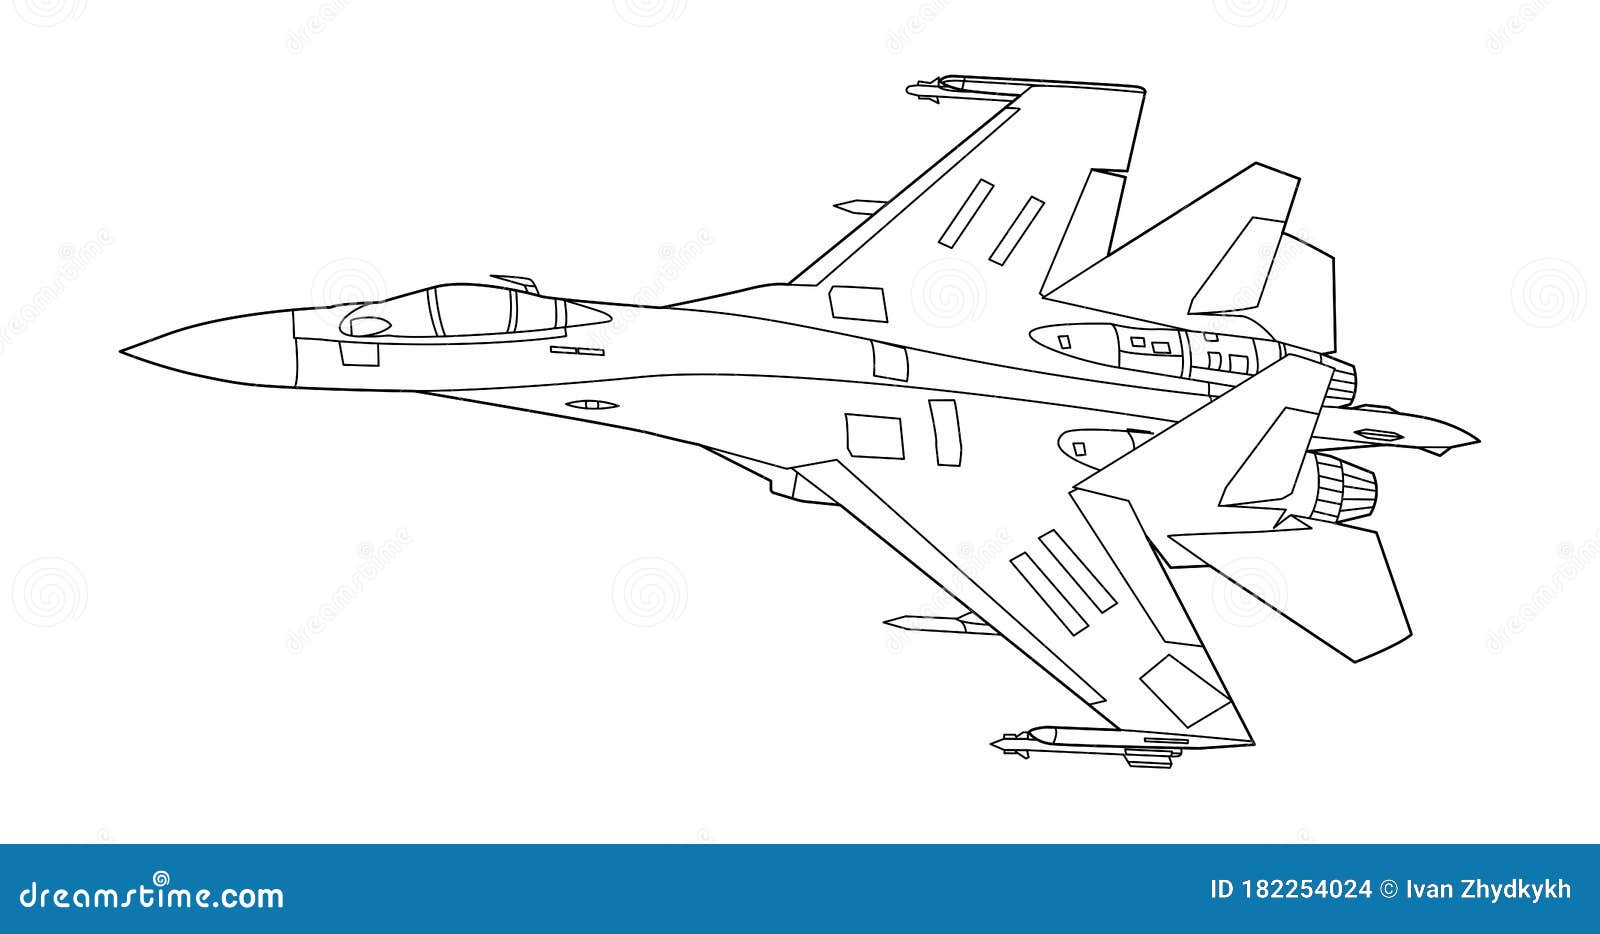 Premium AI Image  Aircraft design pencil sketch showing the flow of air  around the plane in flight